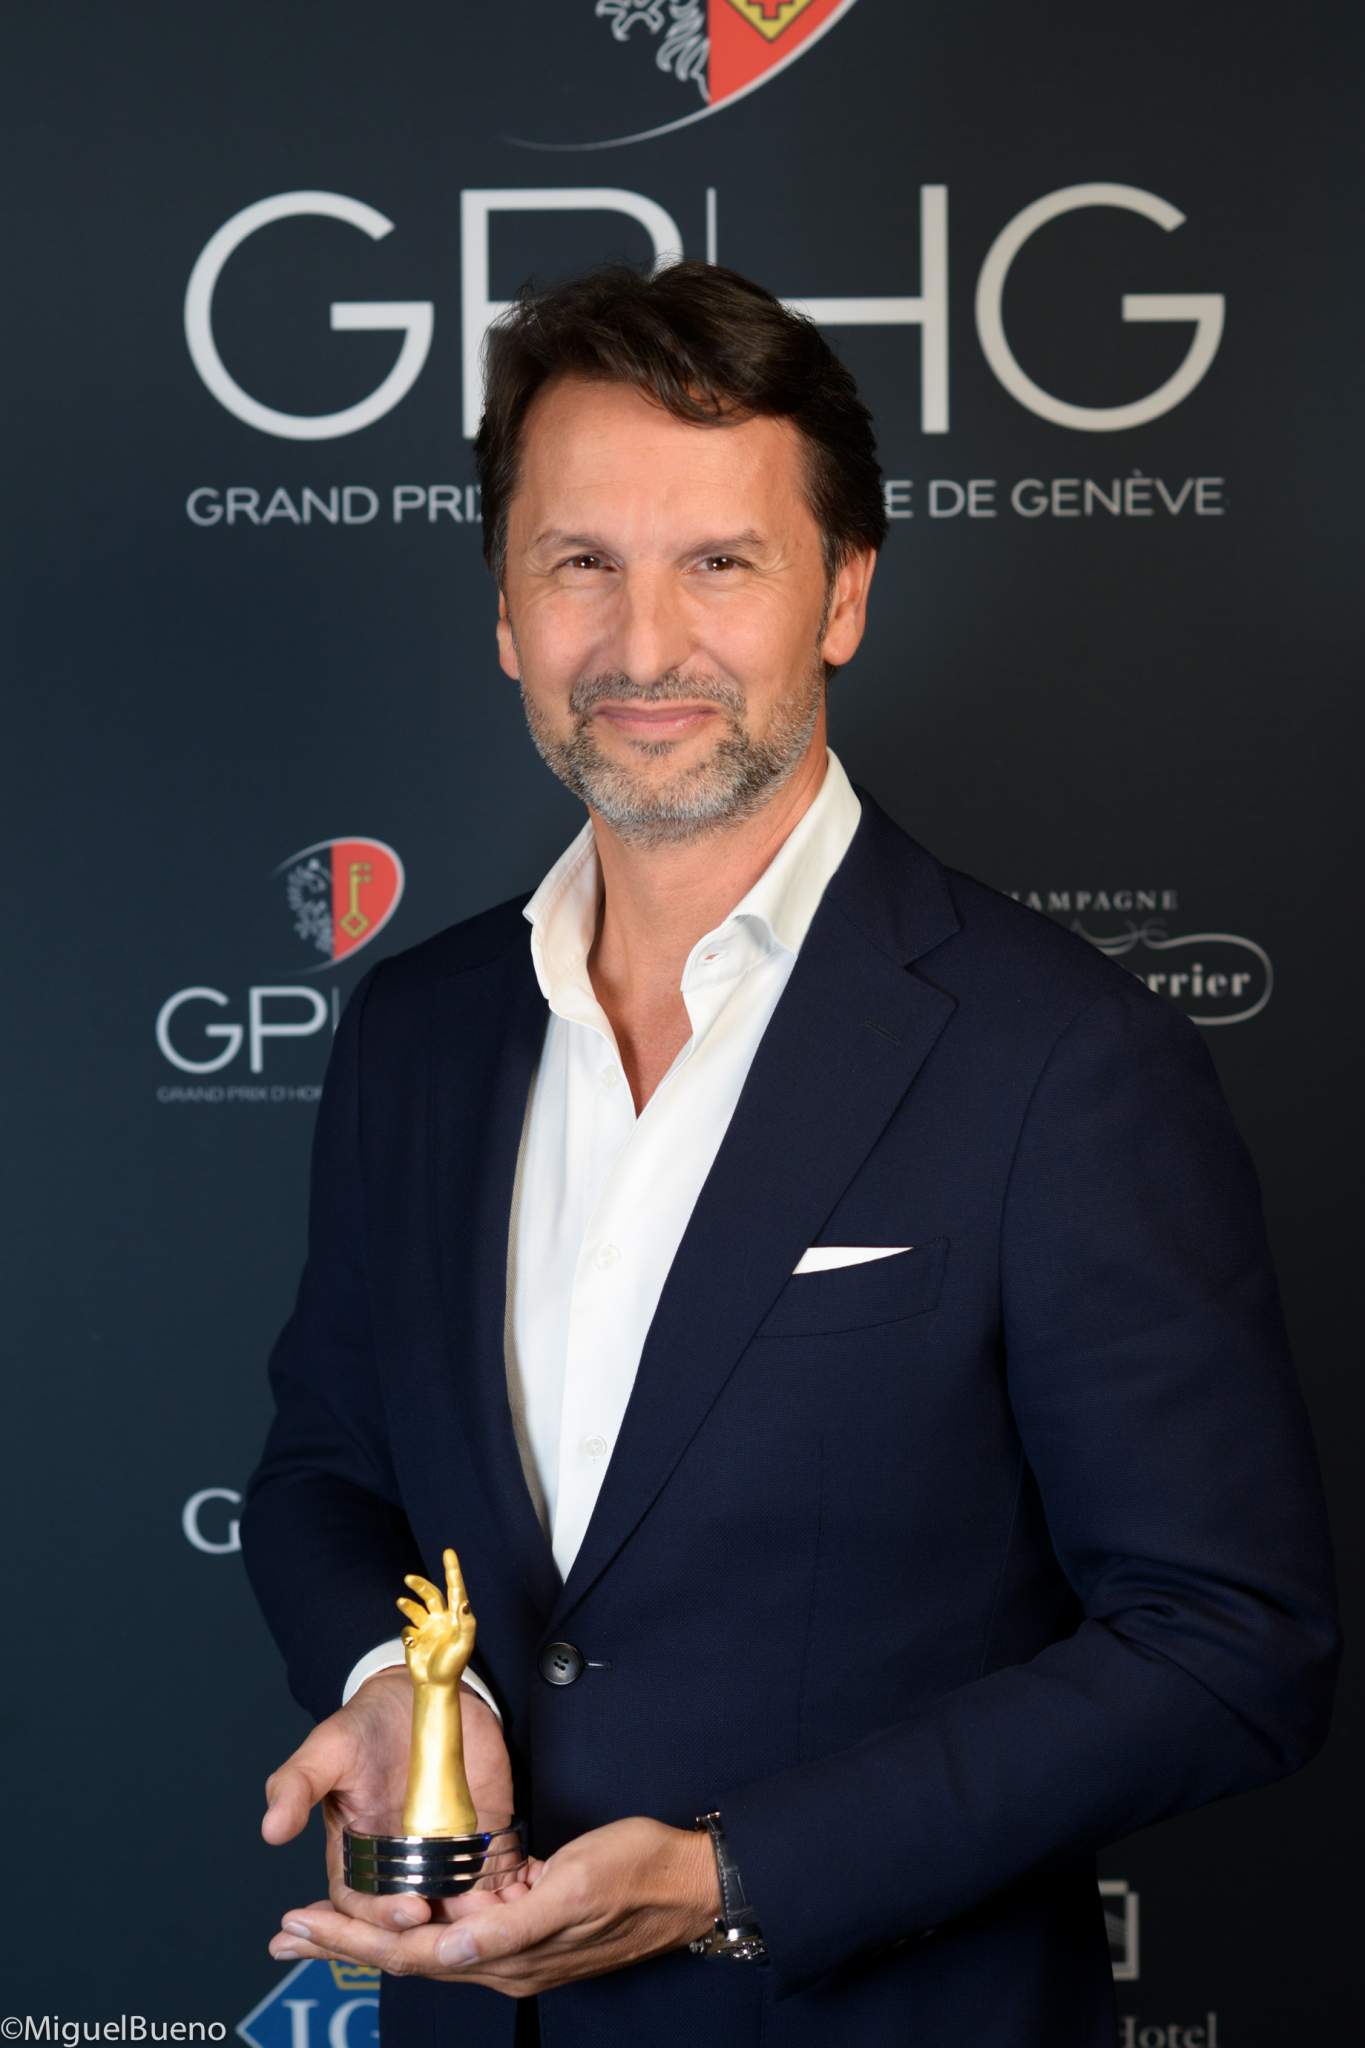 Owner &amp; Creative Director of MB&amp;F, winner of the Ladies’ Complication Watch Prize 2019